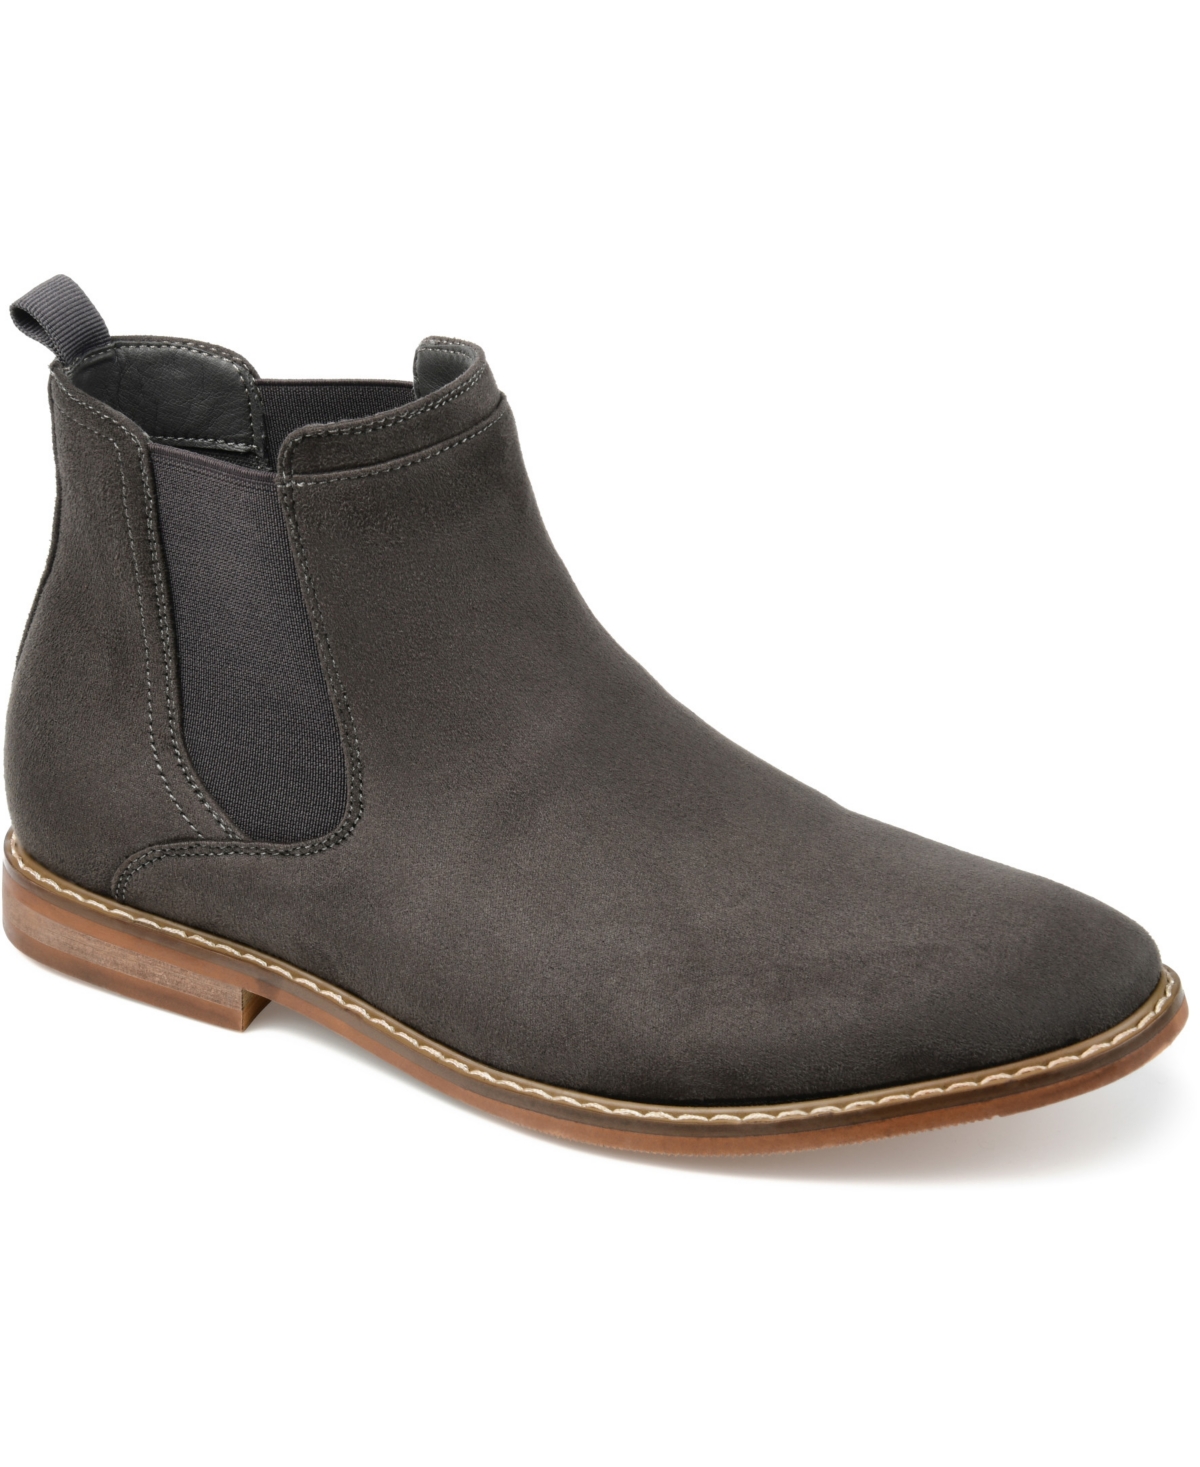 Men's Marshall Wide Width Chelsea Boots - Taupe